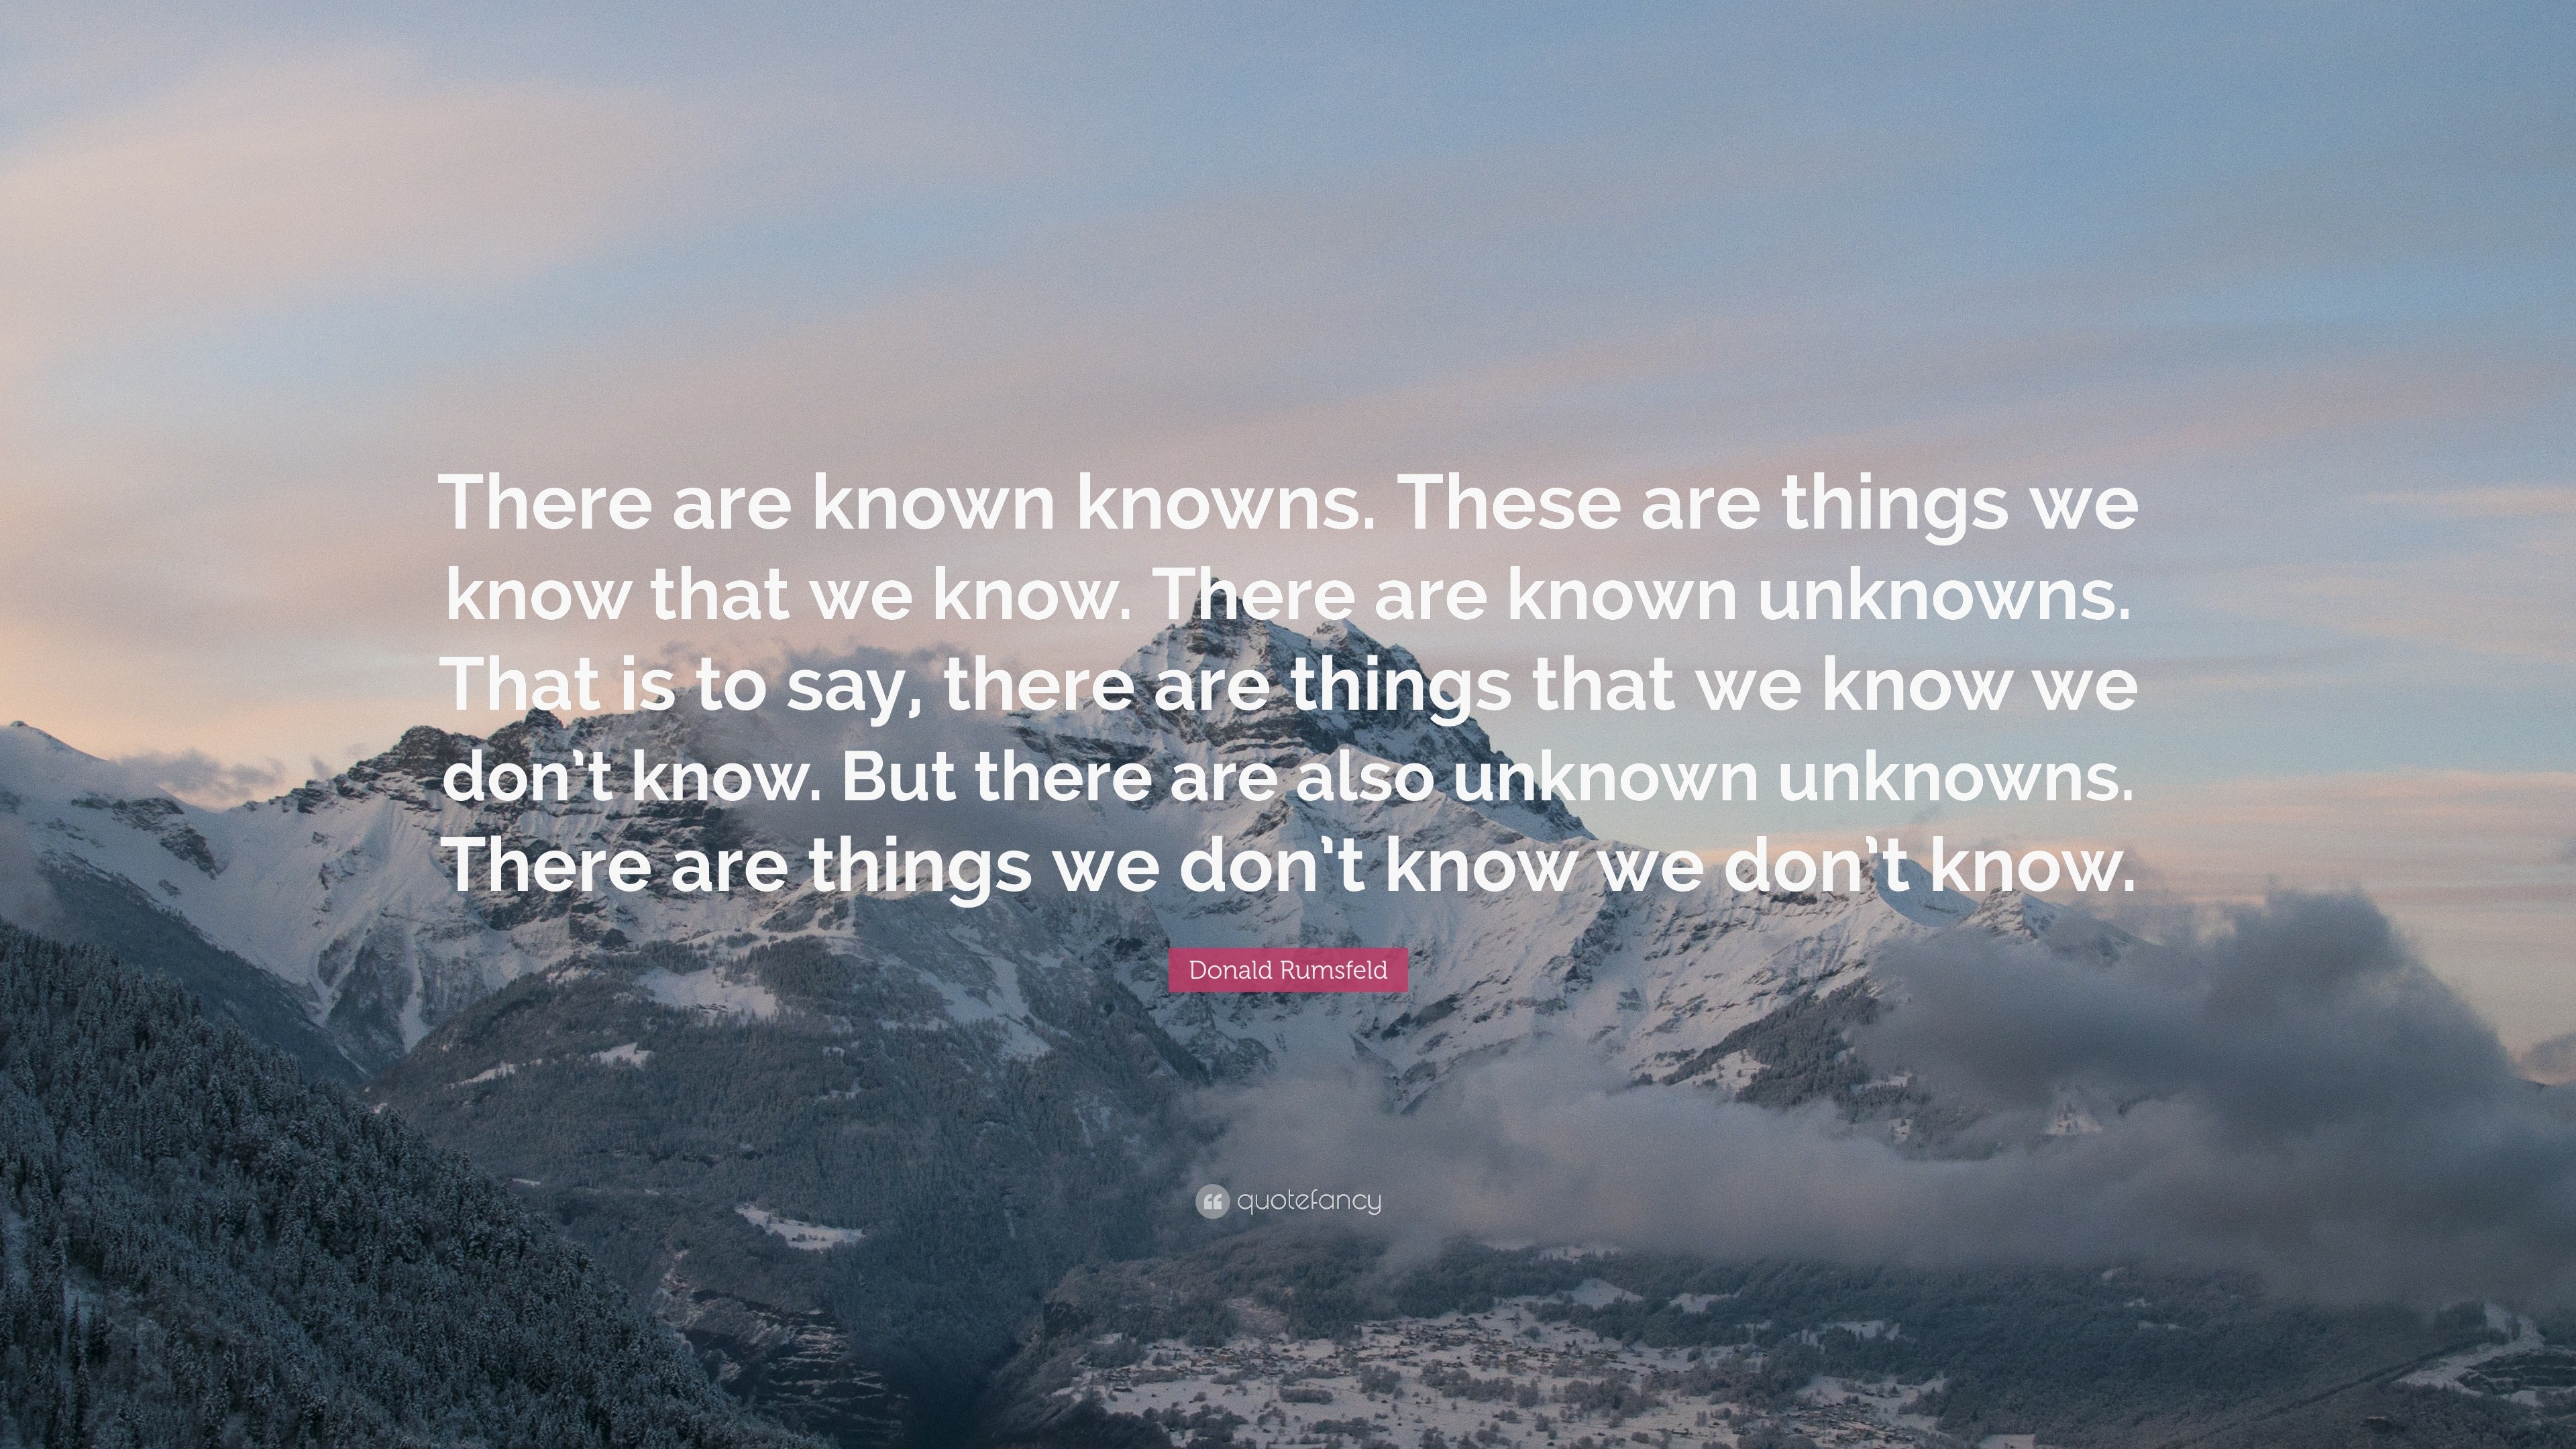 Donald Rumsfeld Quote: "There are known knowns. These are things we know that we know. There are ...